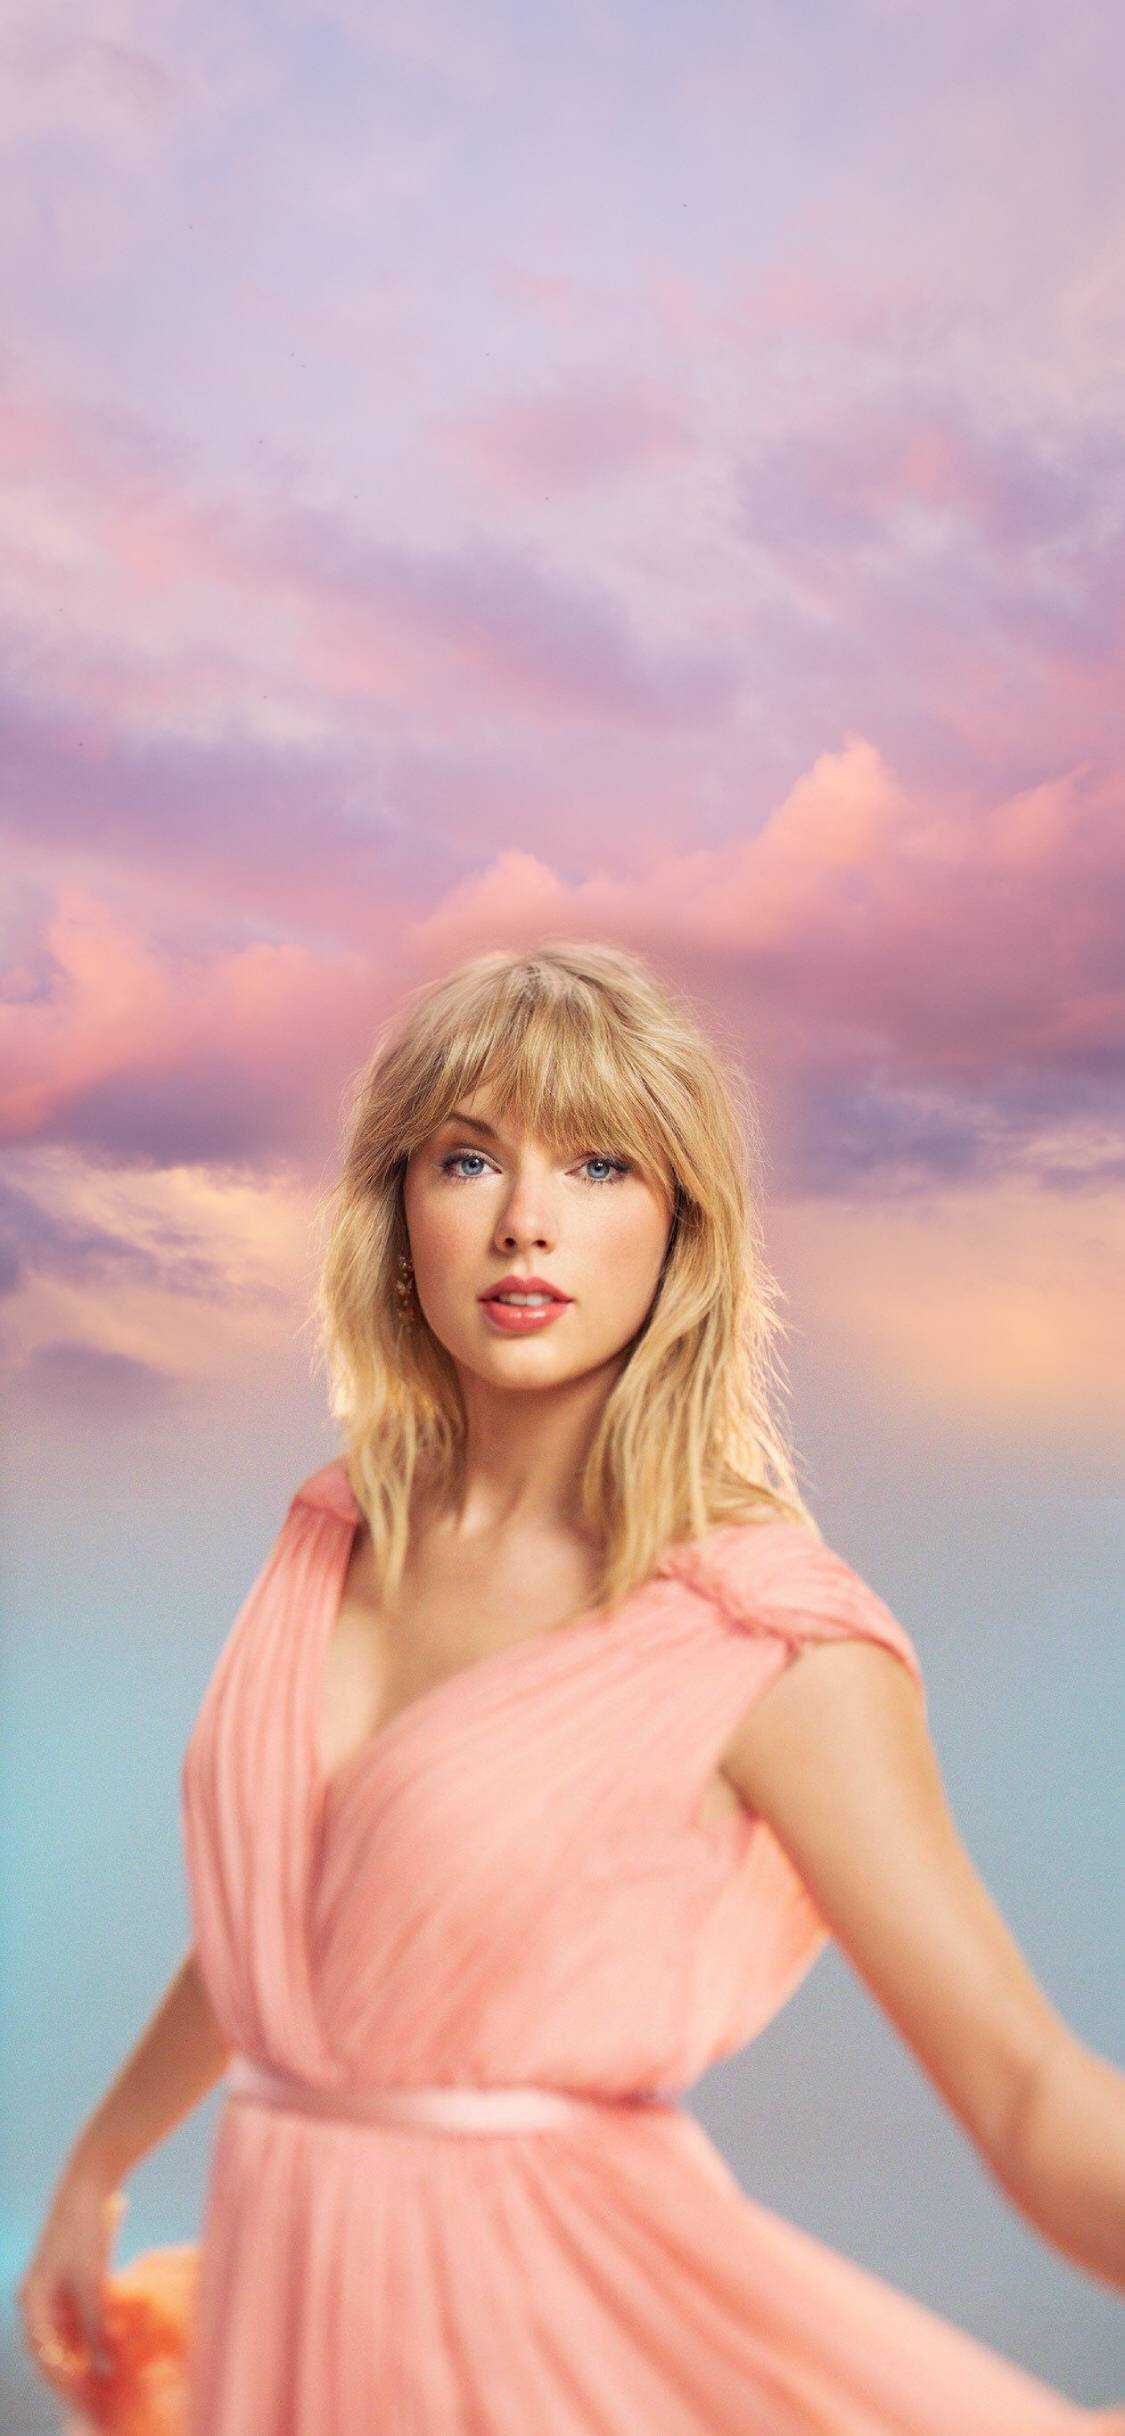 Taylor Swift in a pink dress with a sky background - Taylor Swift